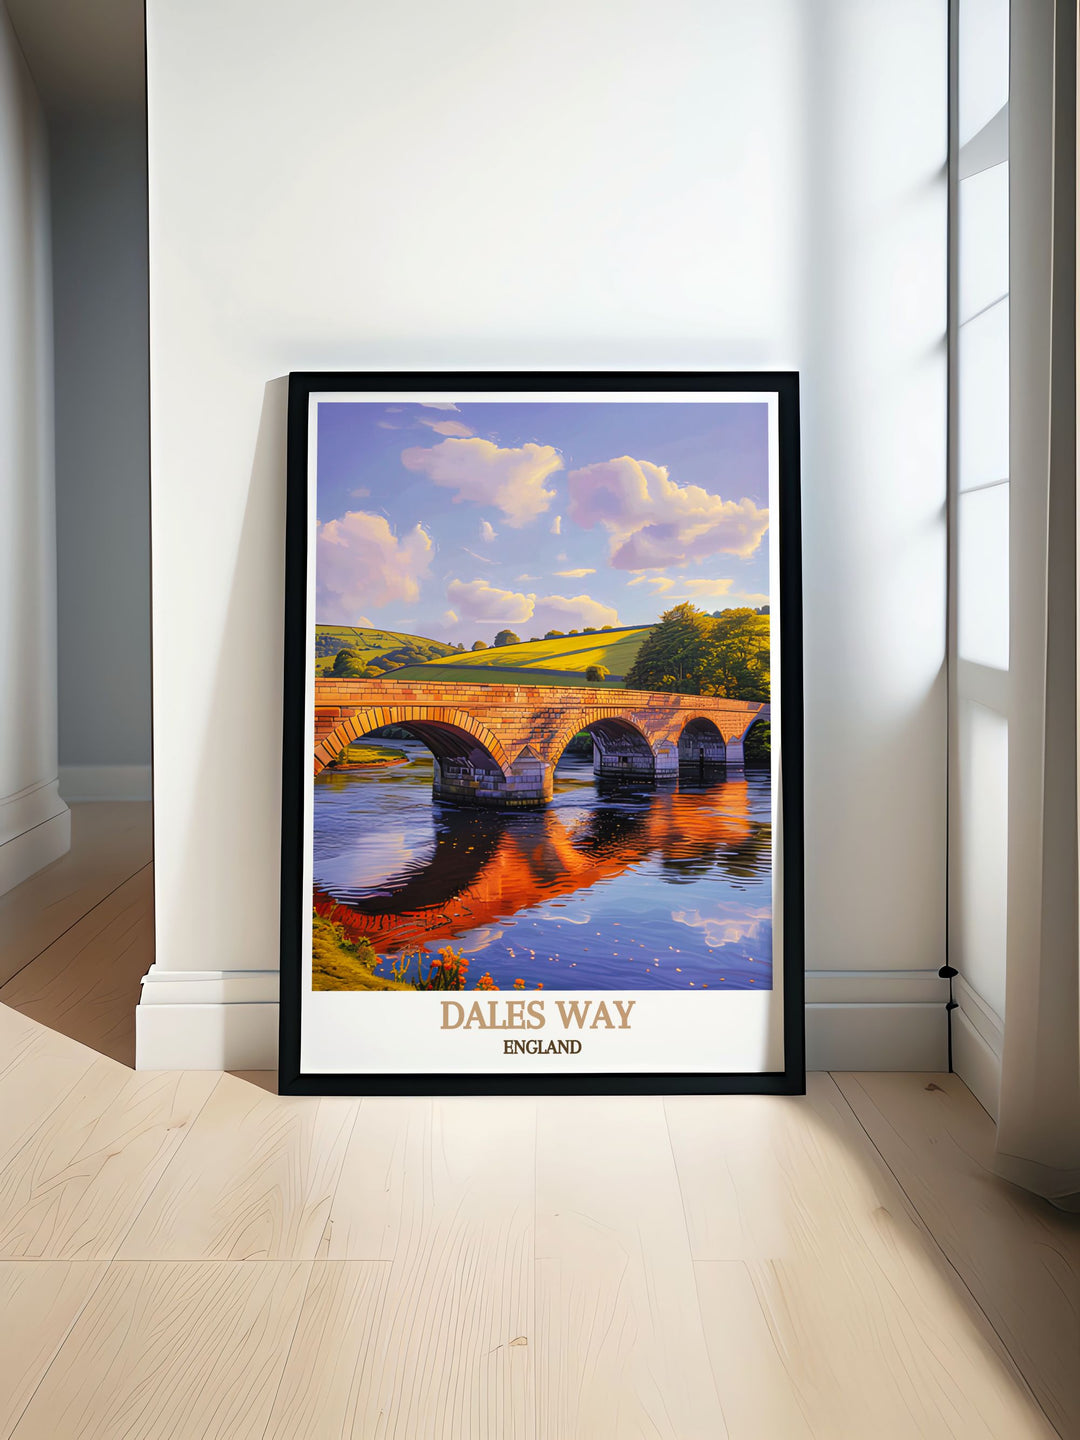 Modern wall decor capturing the scenic beauty of the Dales Way hiking trail in England, ideal for enhancing any room with a touch of countryside charm.